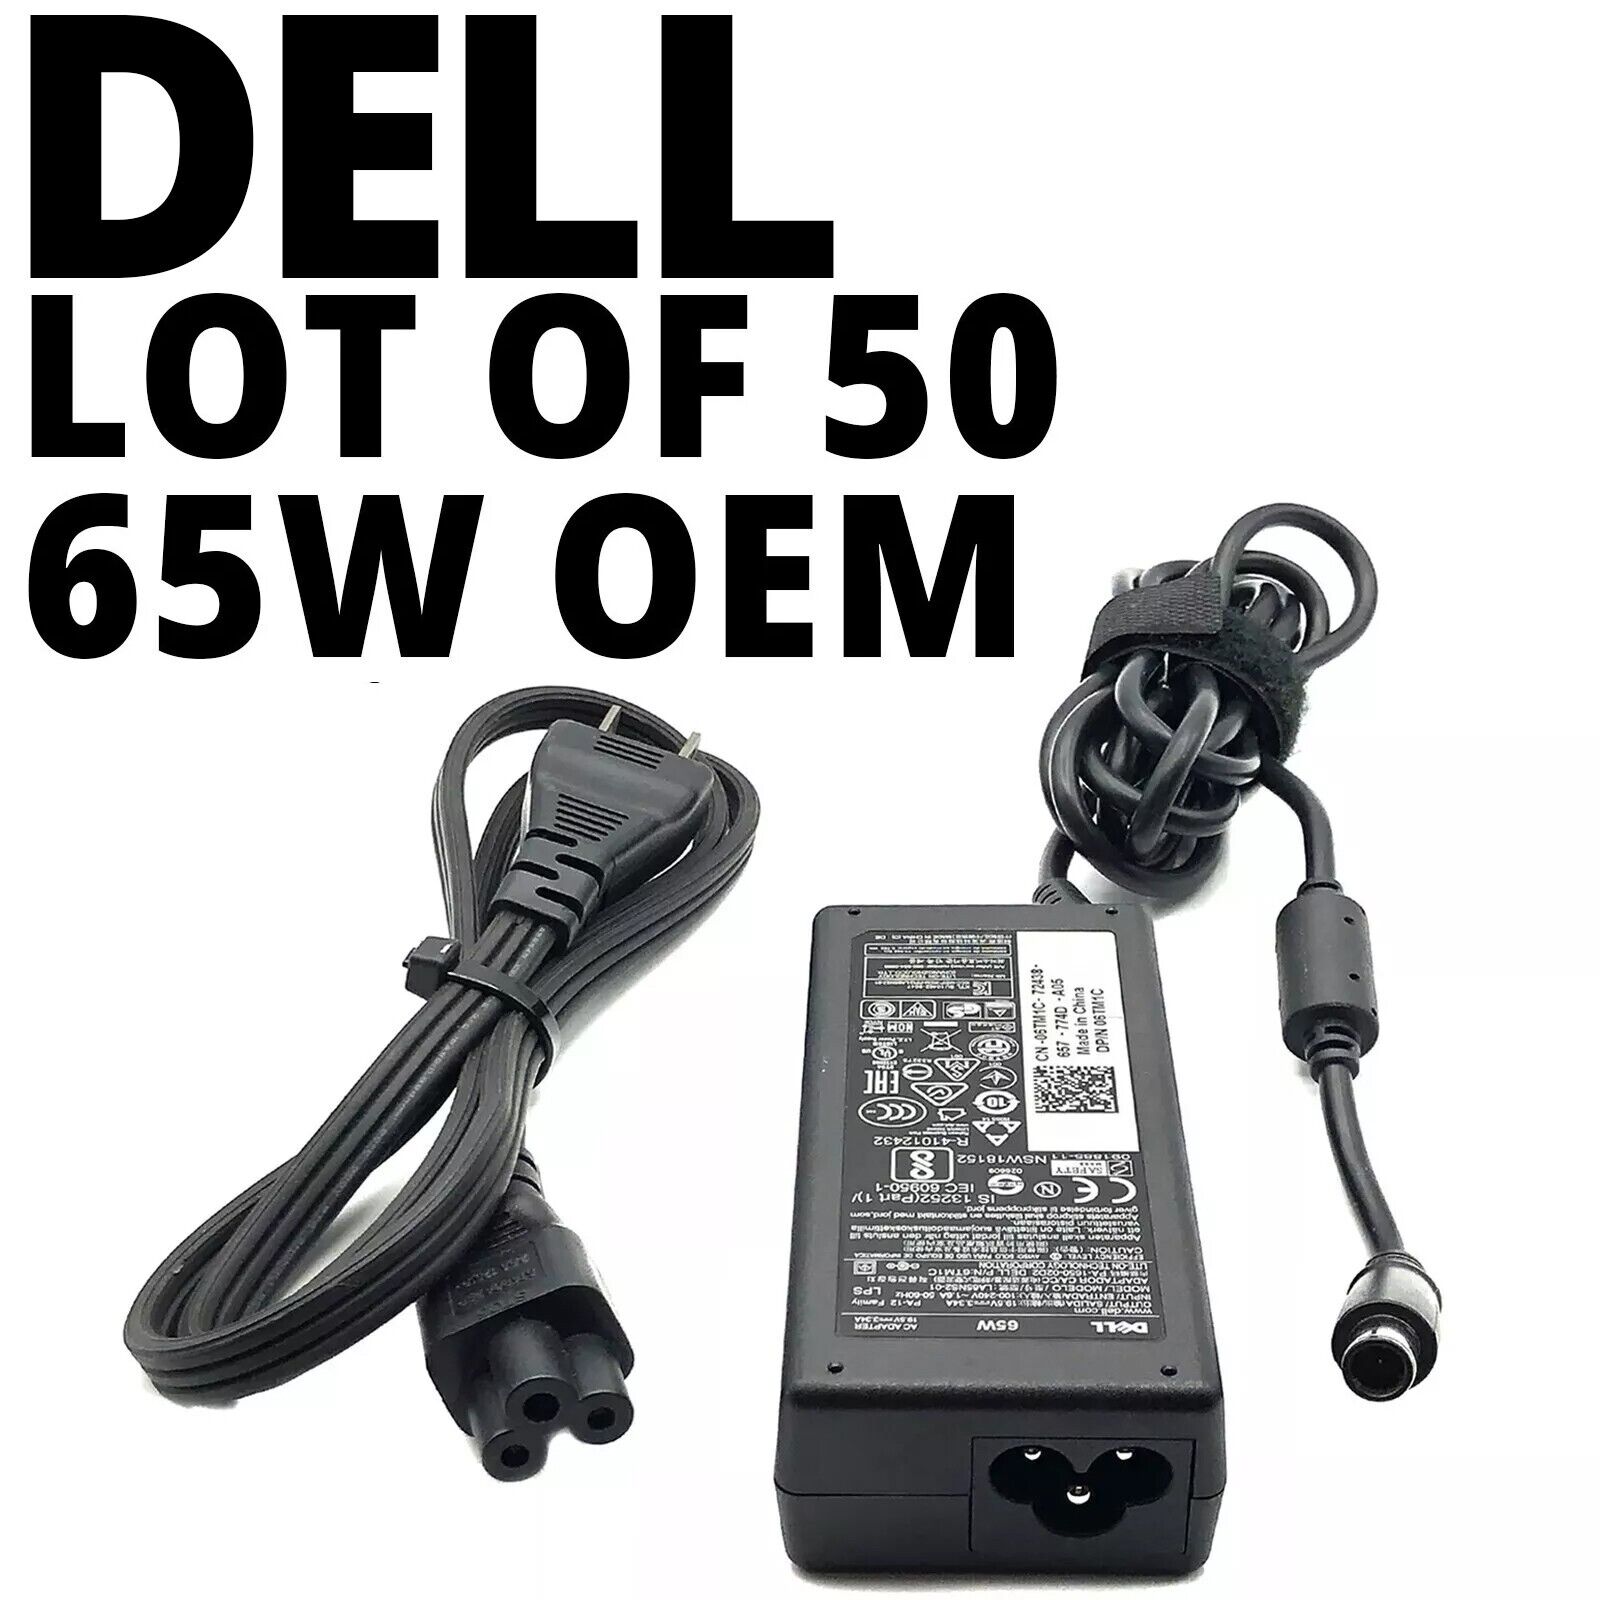 Lot of 50 OEM Dell 65W AC Adapter Laptop Power Charger 19.5V 3.34A 7.4mm & Cords